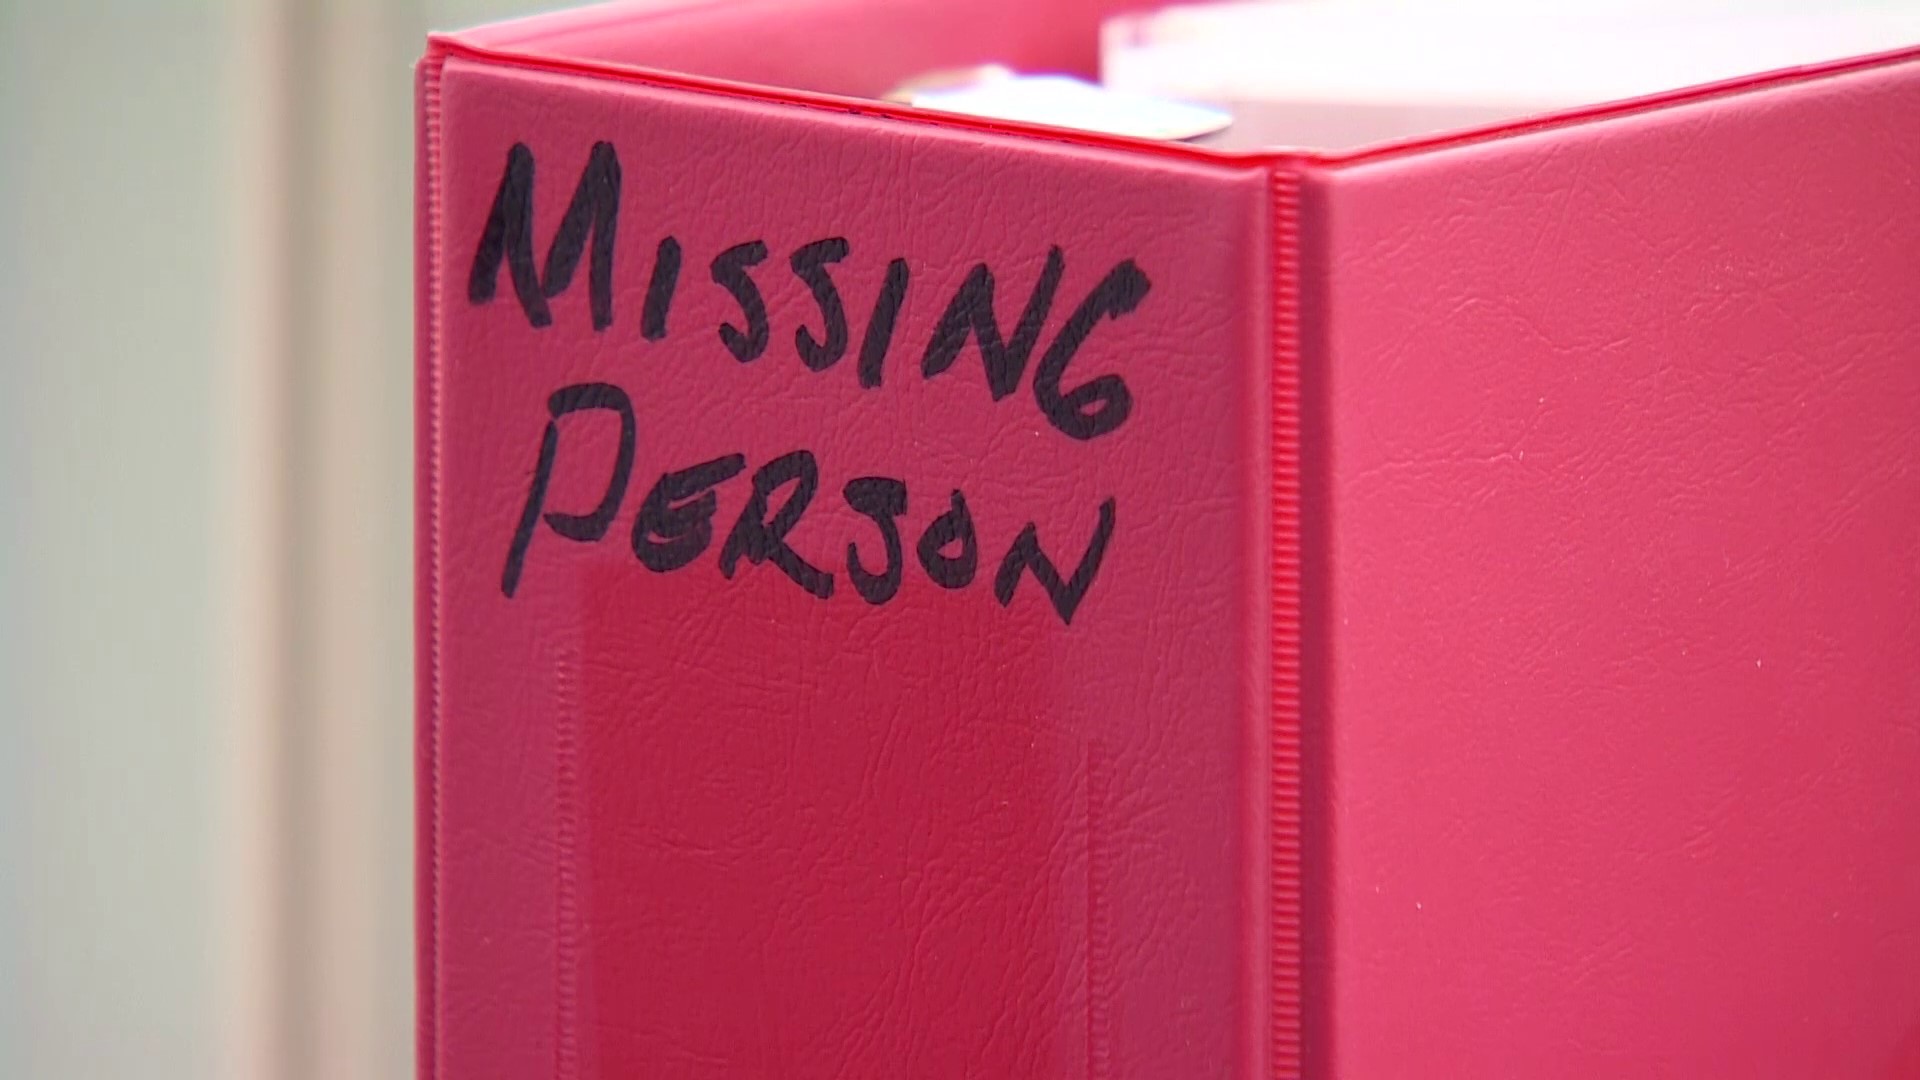 On average, the Dallas Police Department gets 5,000 missing persons cases a year and 2,000 cases involving runaways.